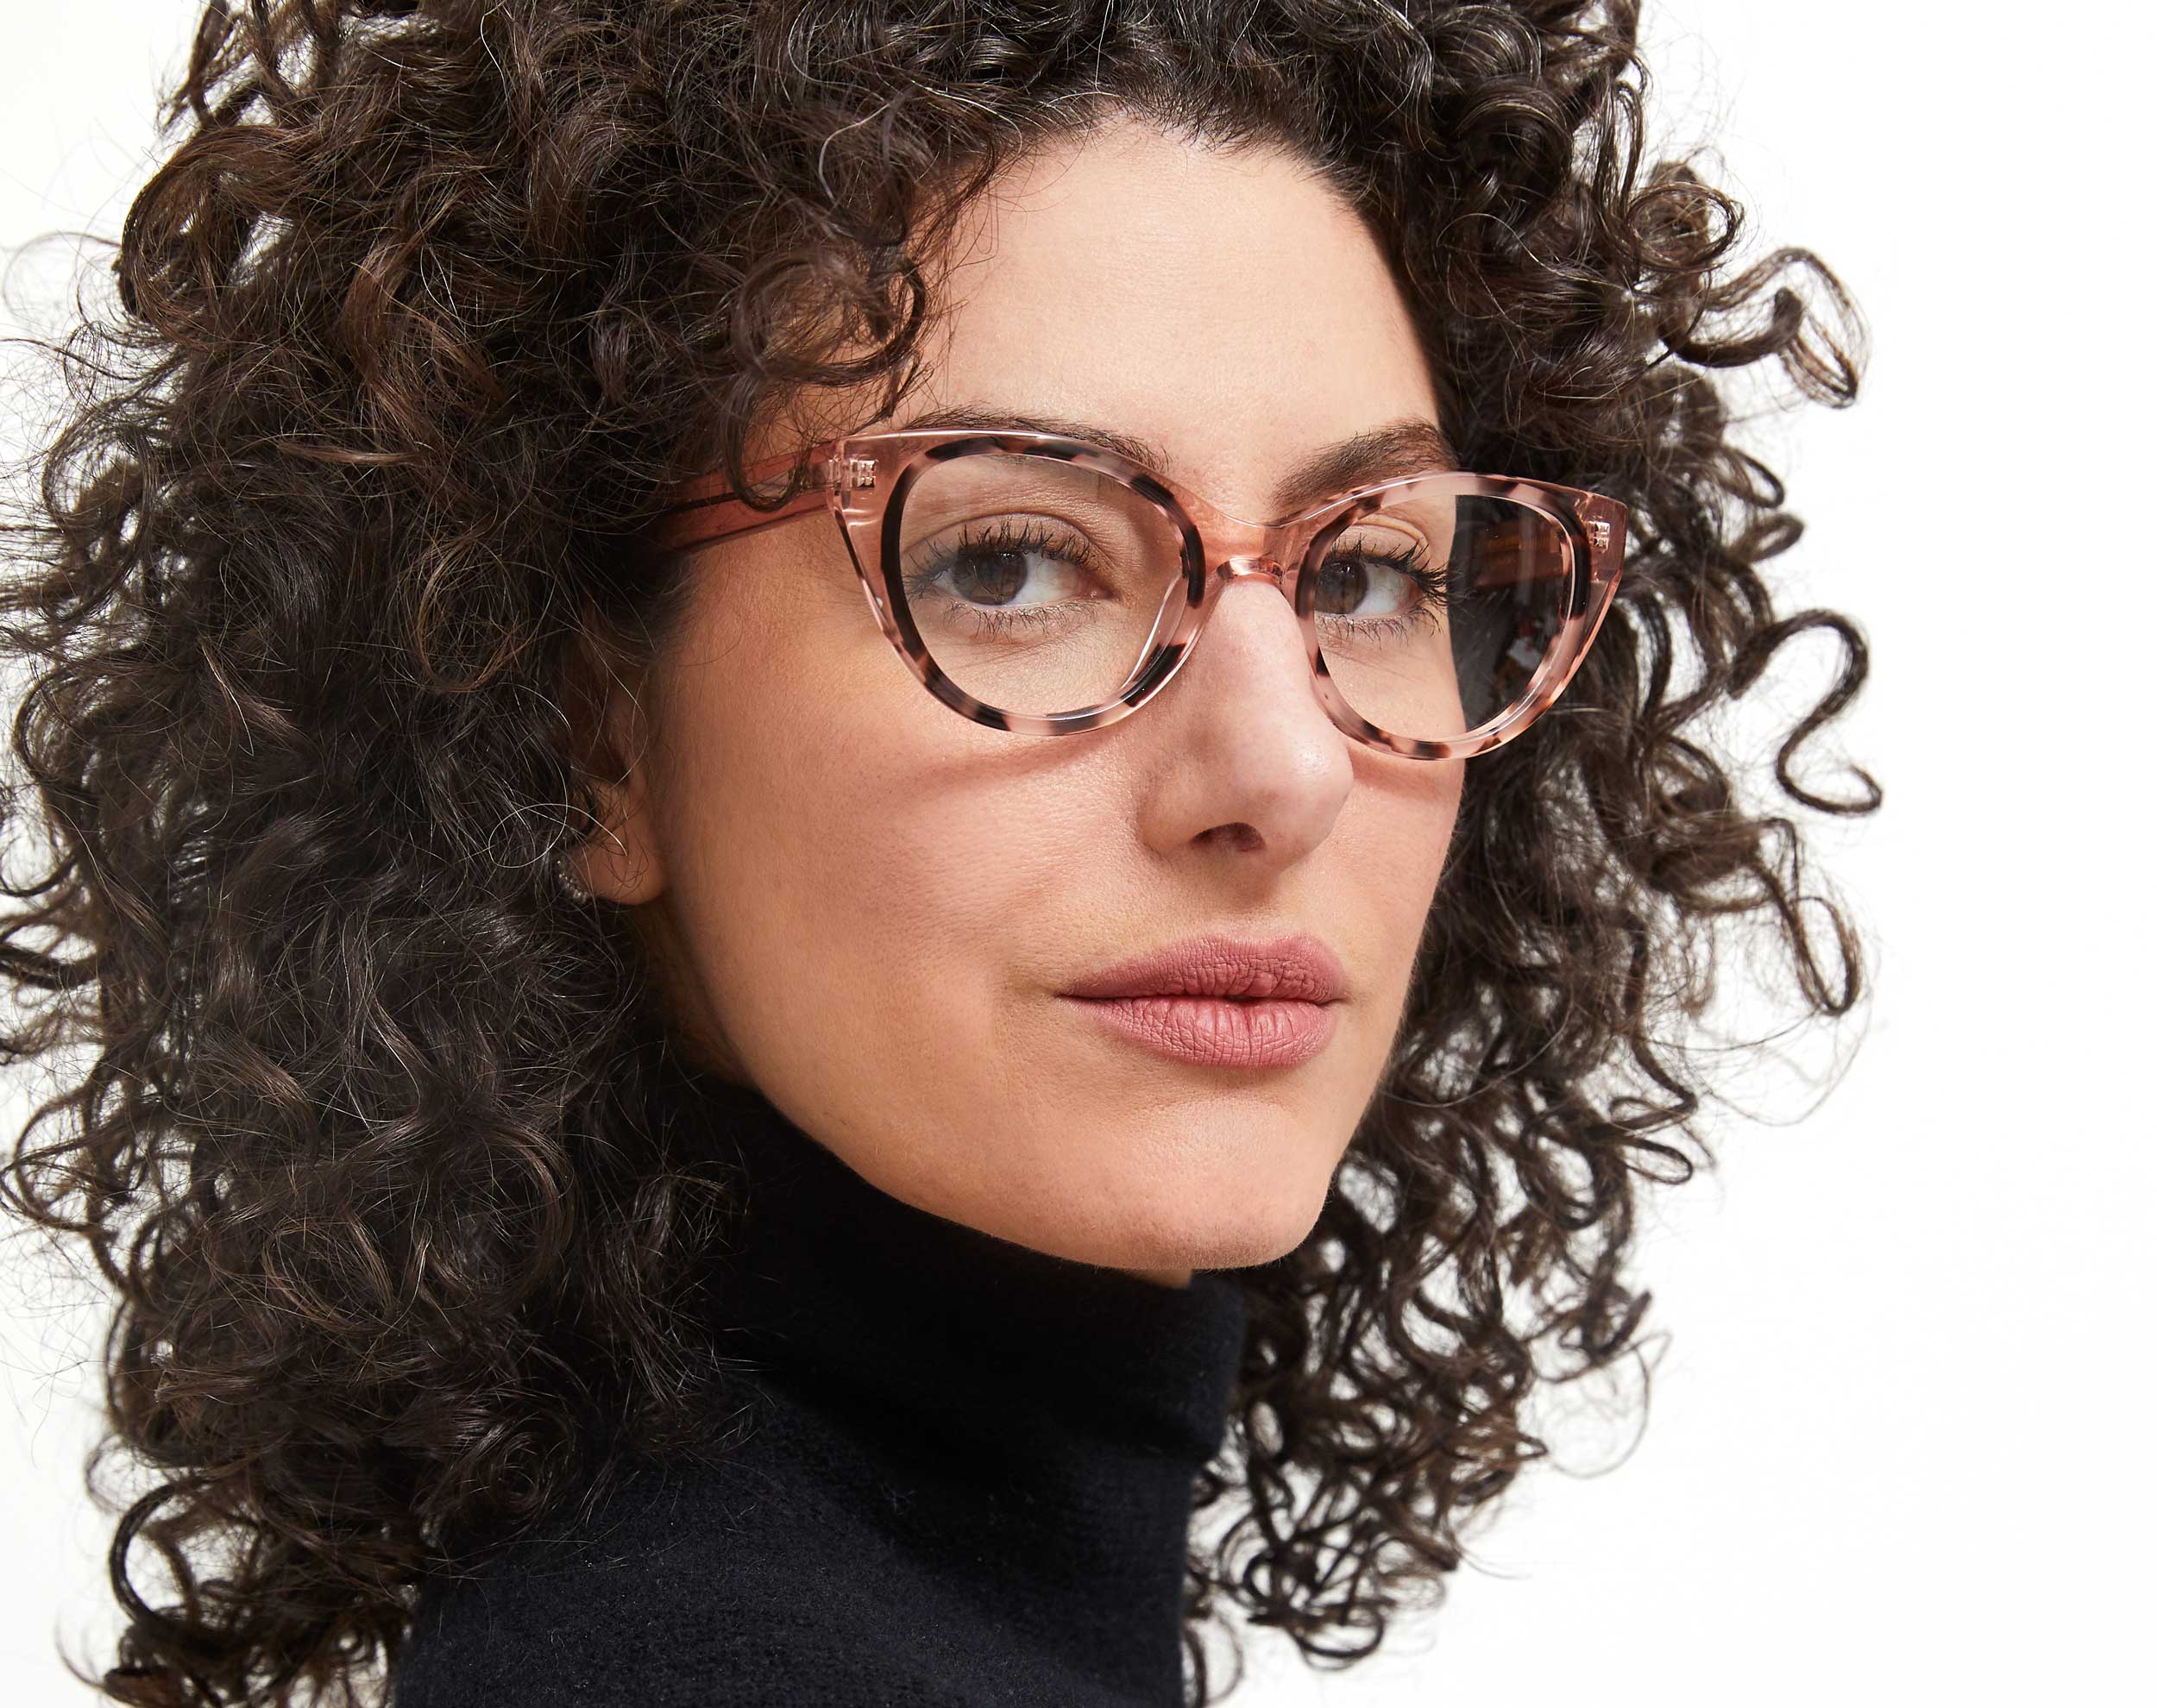 Photo of a man or woman wearing Colette Creme Reading Glasses by French Kiwis